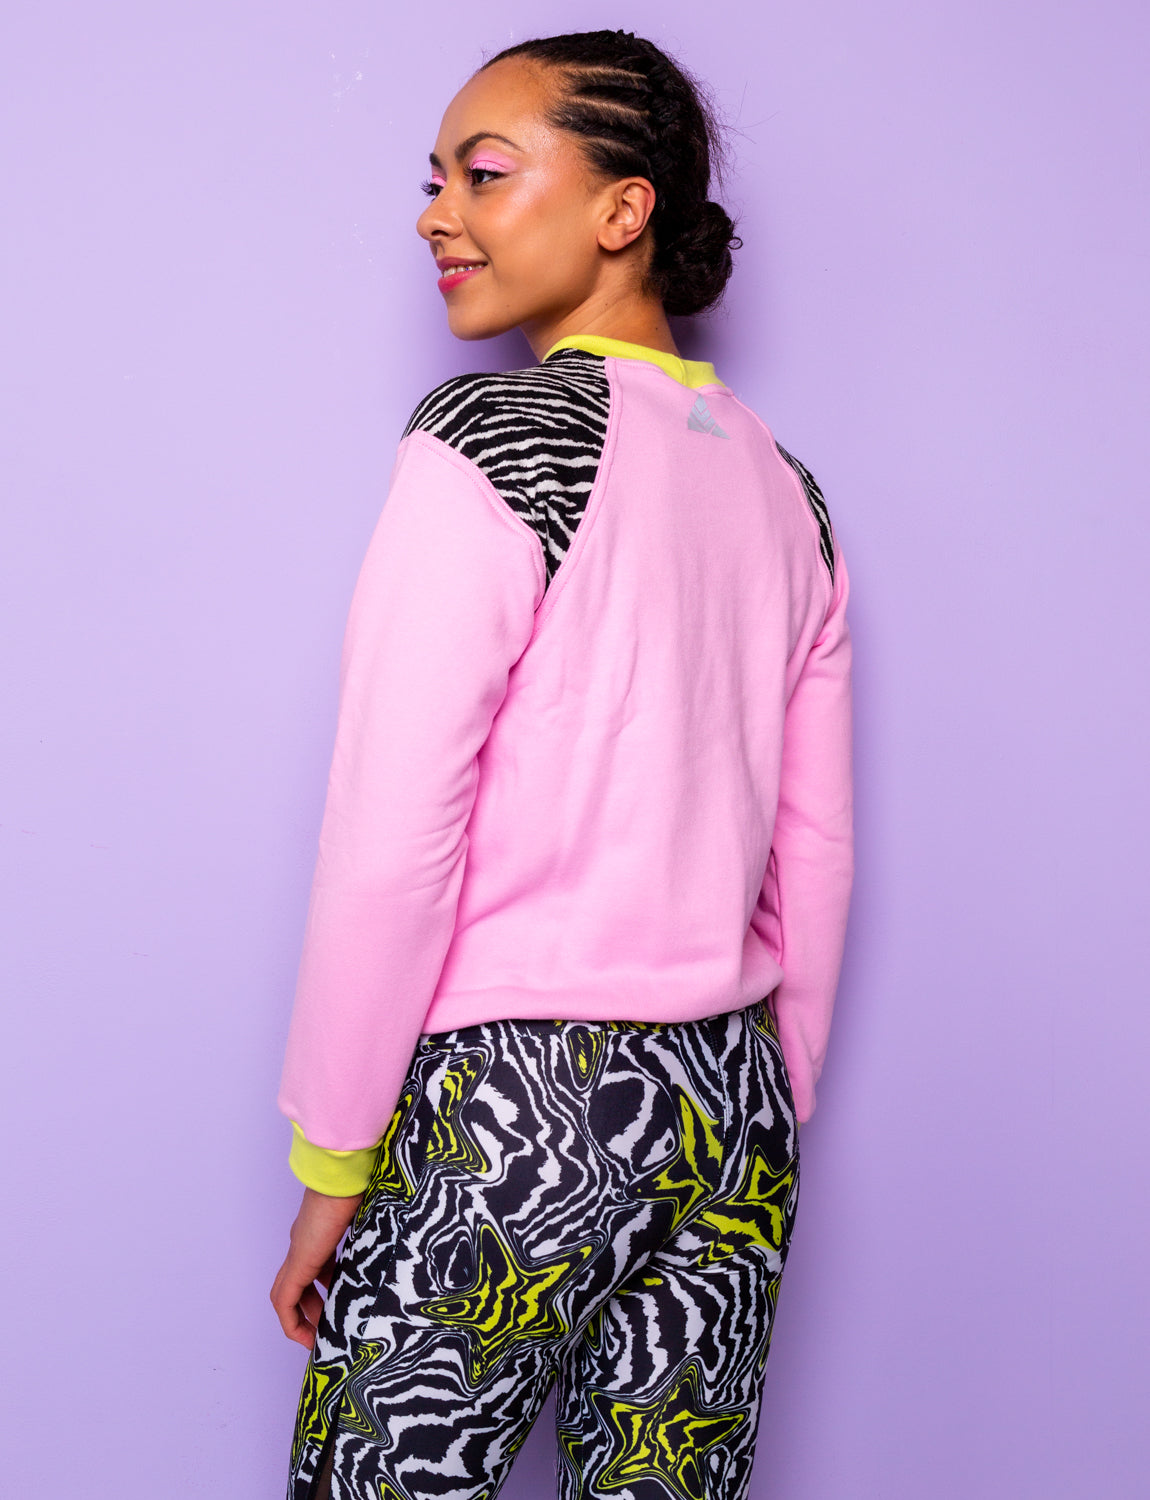 side view of a woman wearing a pink sweatshirt with zebra prints shoulders